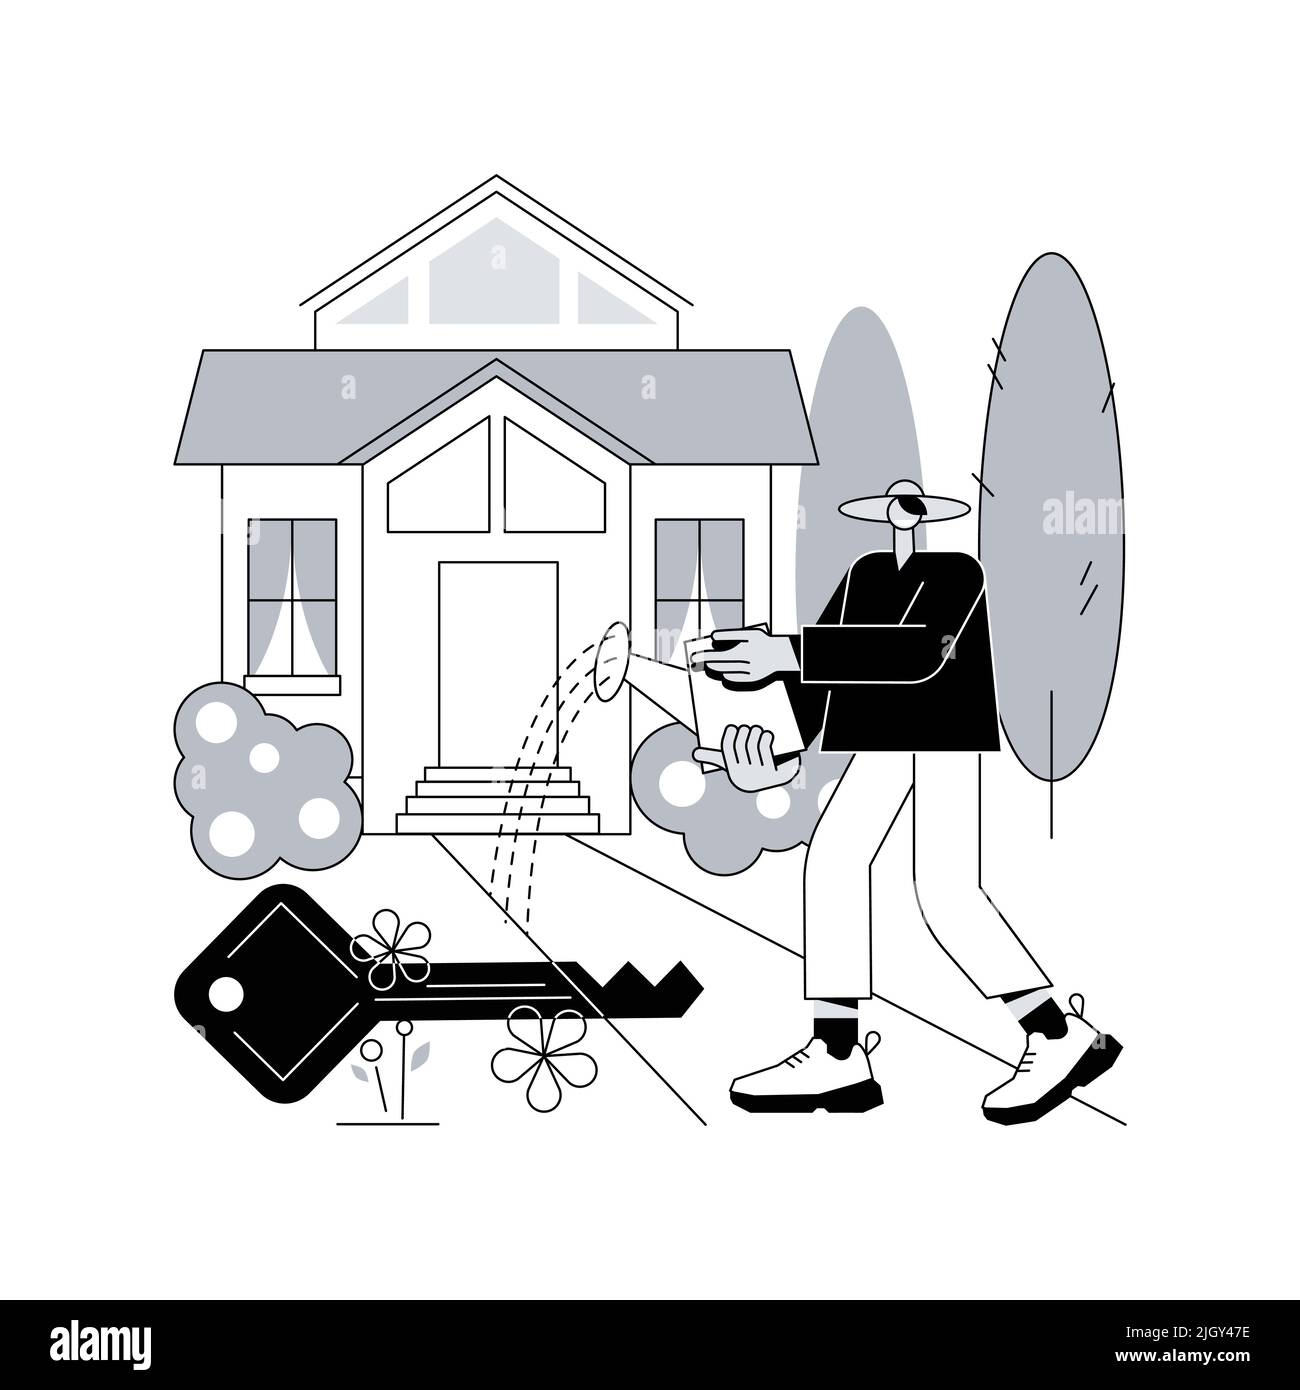 Detached house abstract concept vector illustration. Single family house, stand-alone household, single-detached building, individual land ownership, unattached dwelling unit abstract metaphor. Stock Vector